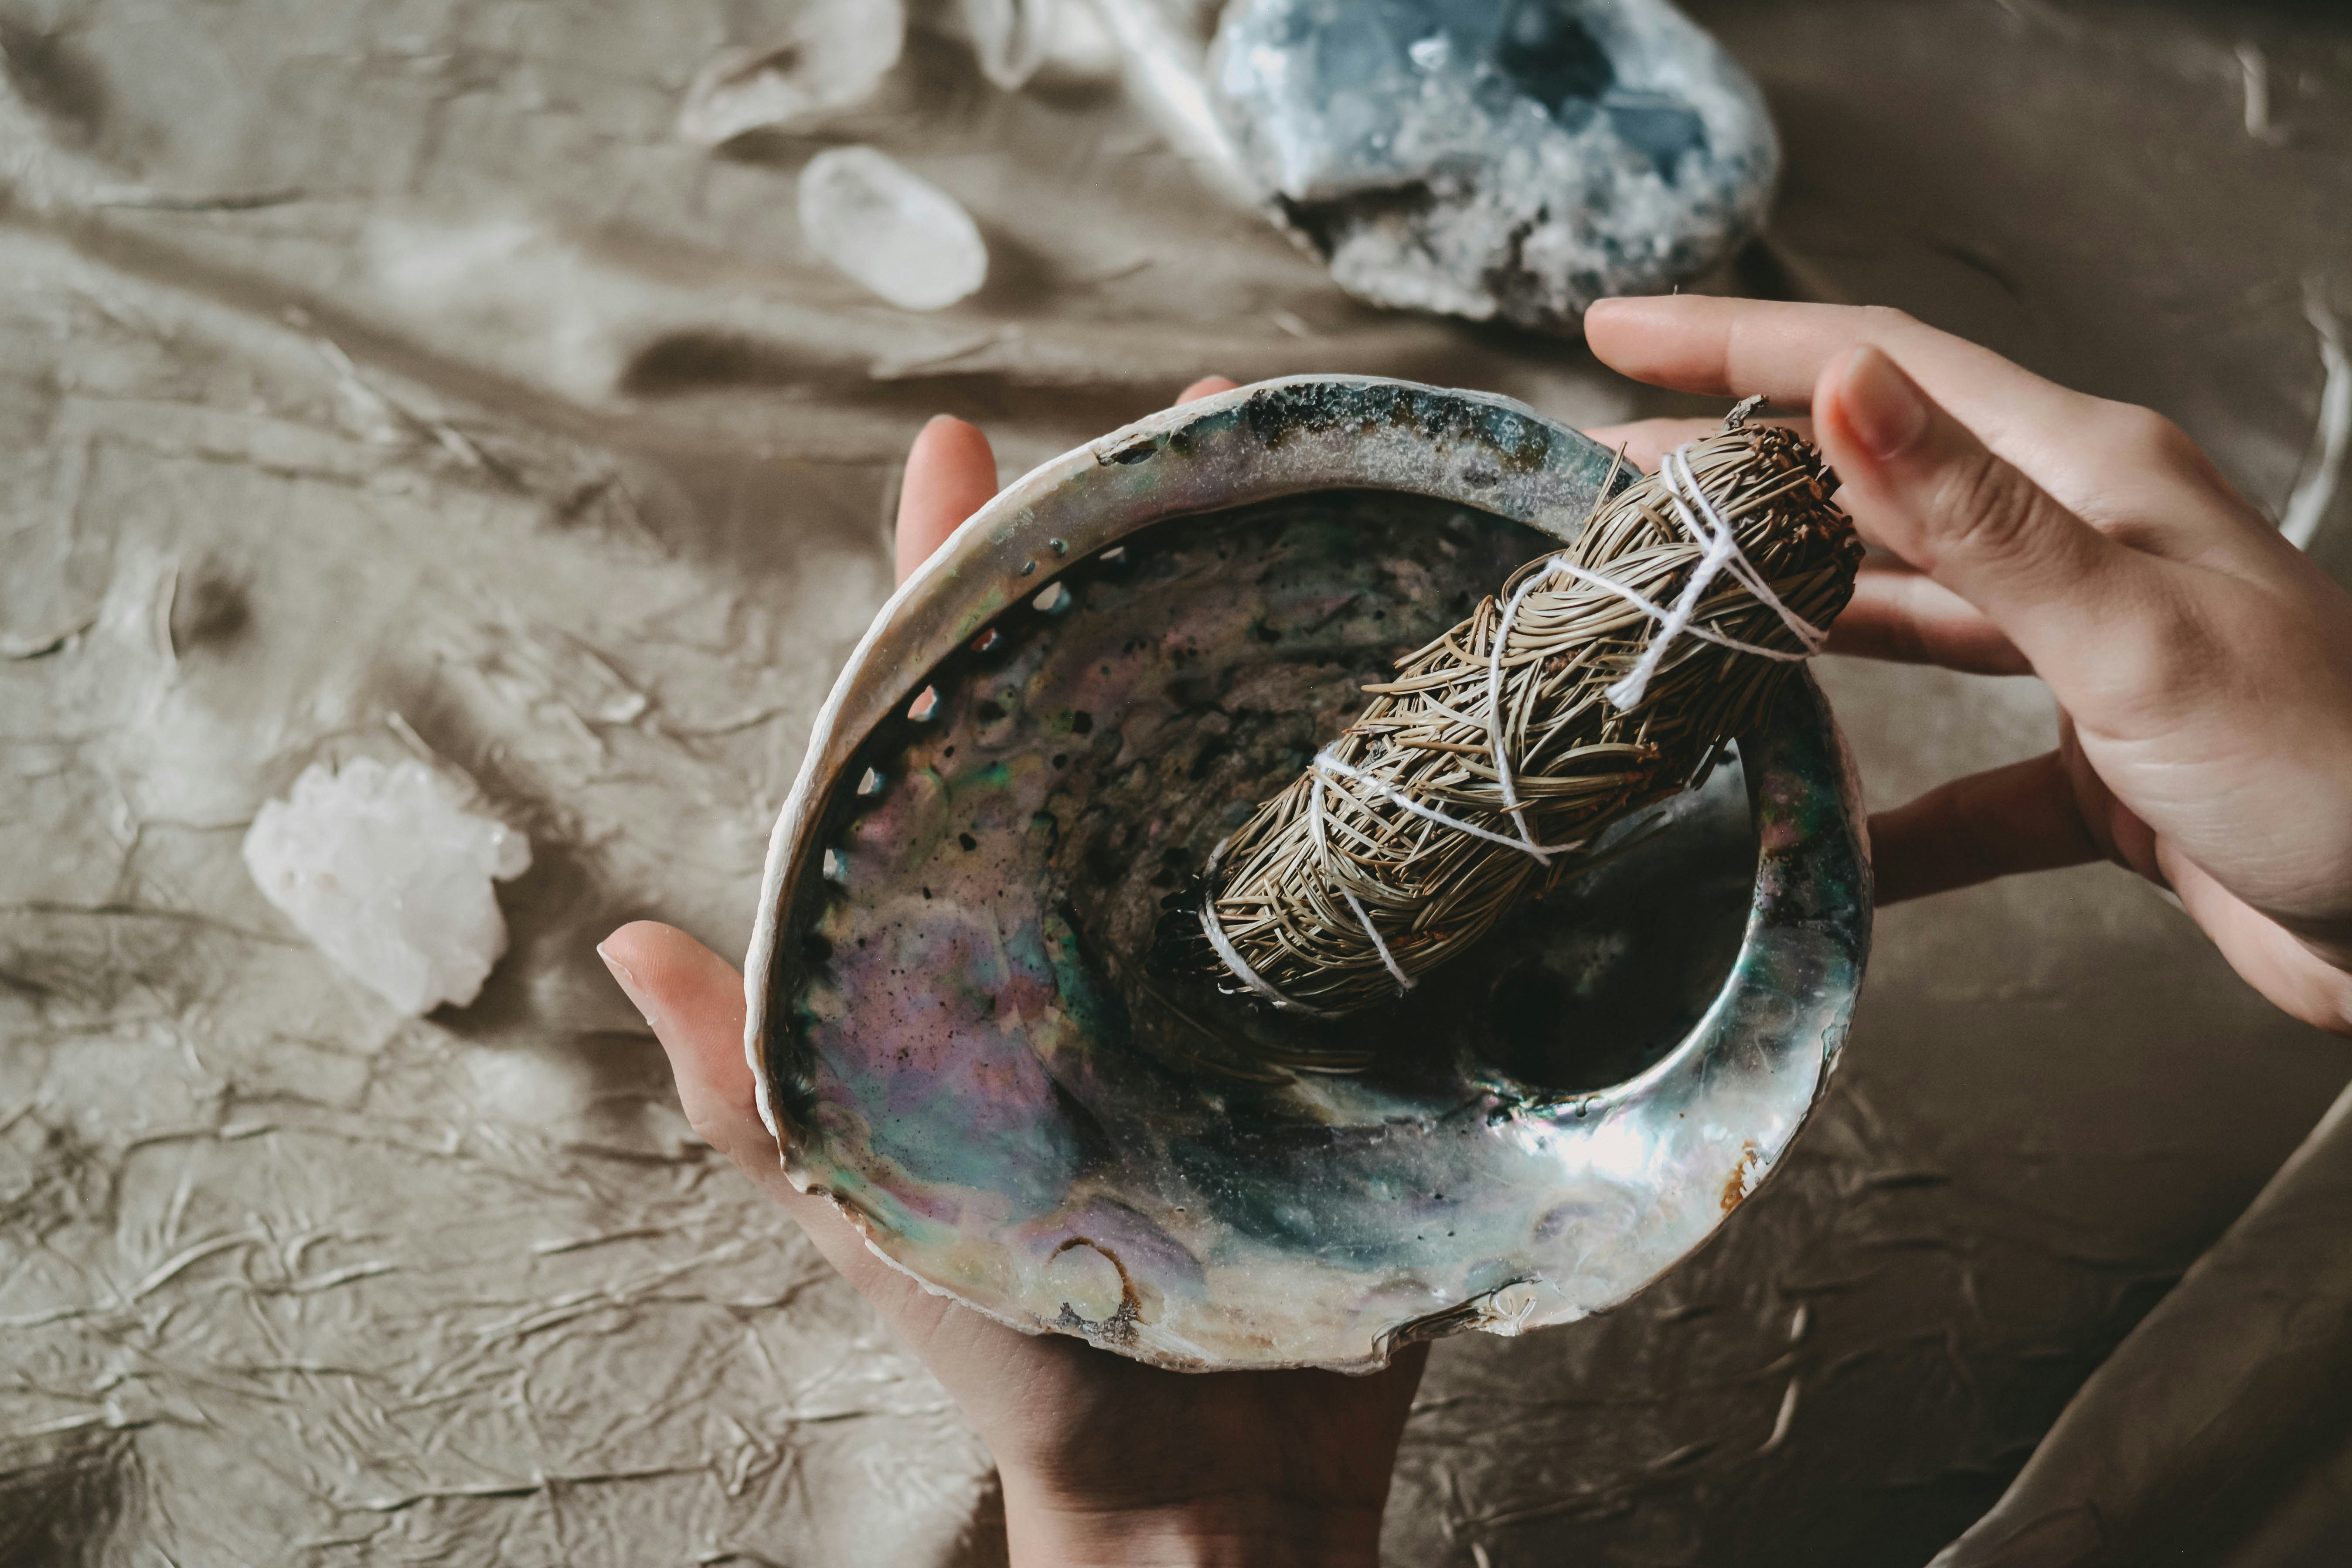 Abalone shell and a pine smudge stick during a smudging holistic ritual ✦ Snag more FREE stock photos each month 👉 https://contentpixie.com/secret-snaps/